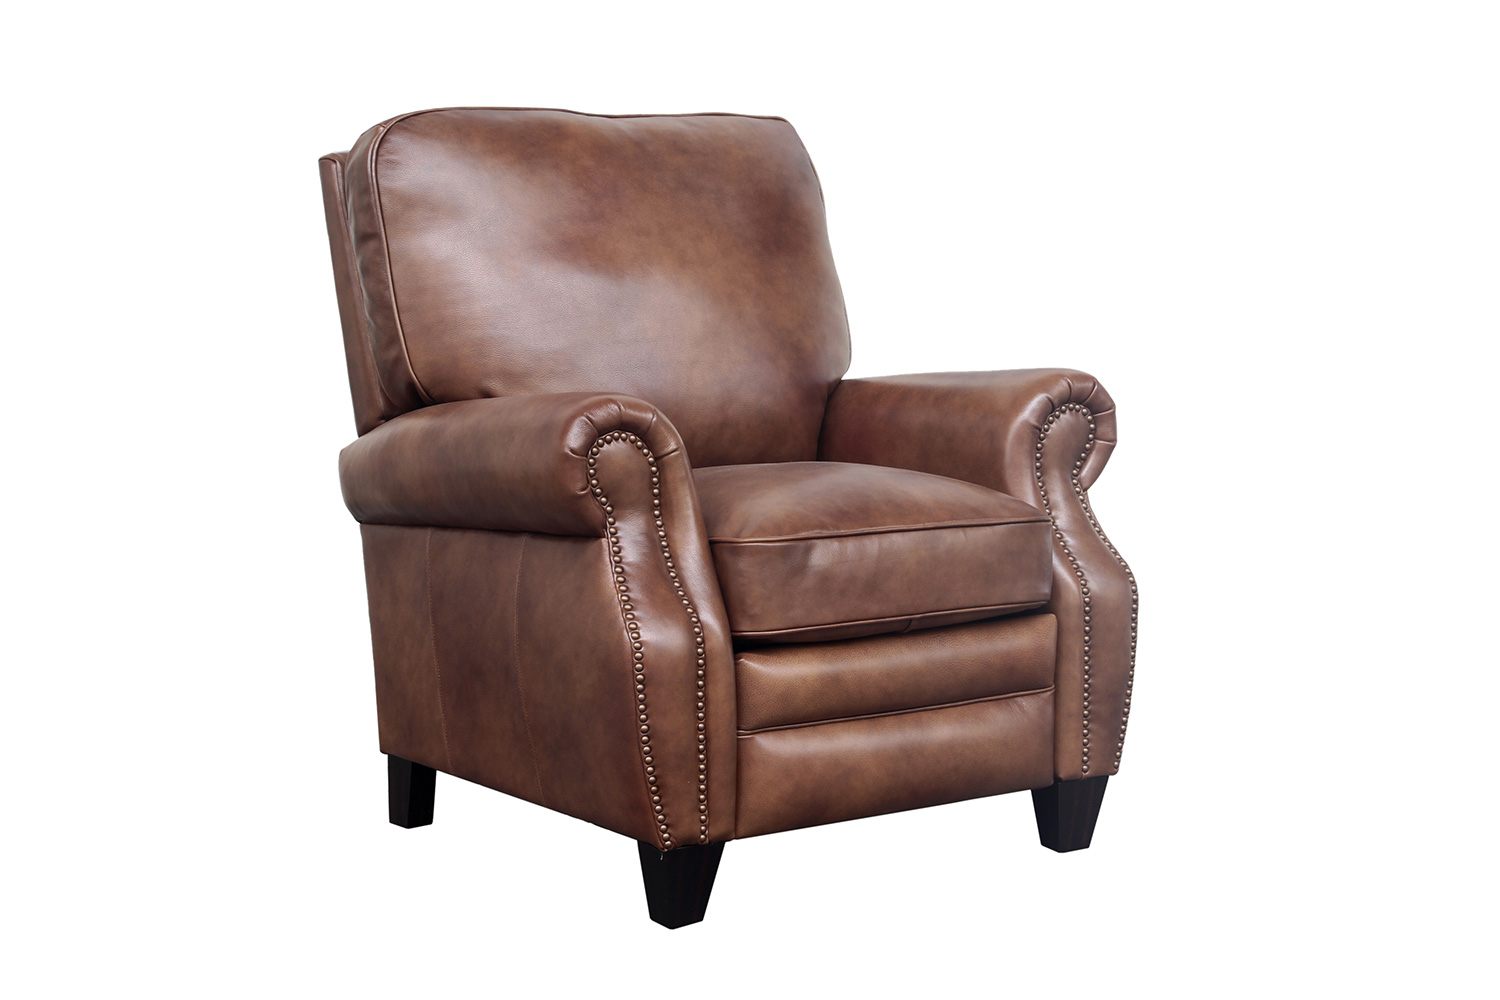 Barcalounger Briarwood Recliner Chair - Wenlock Tawny/All Leather